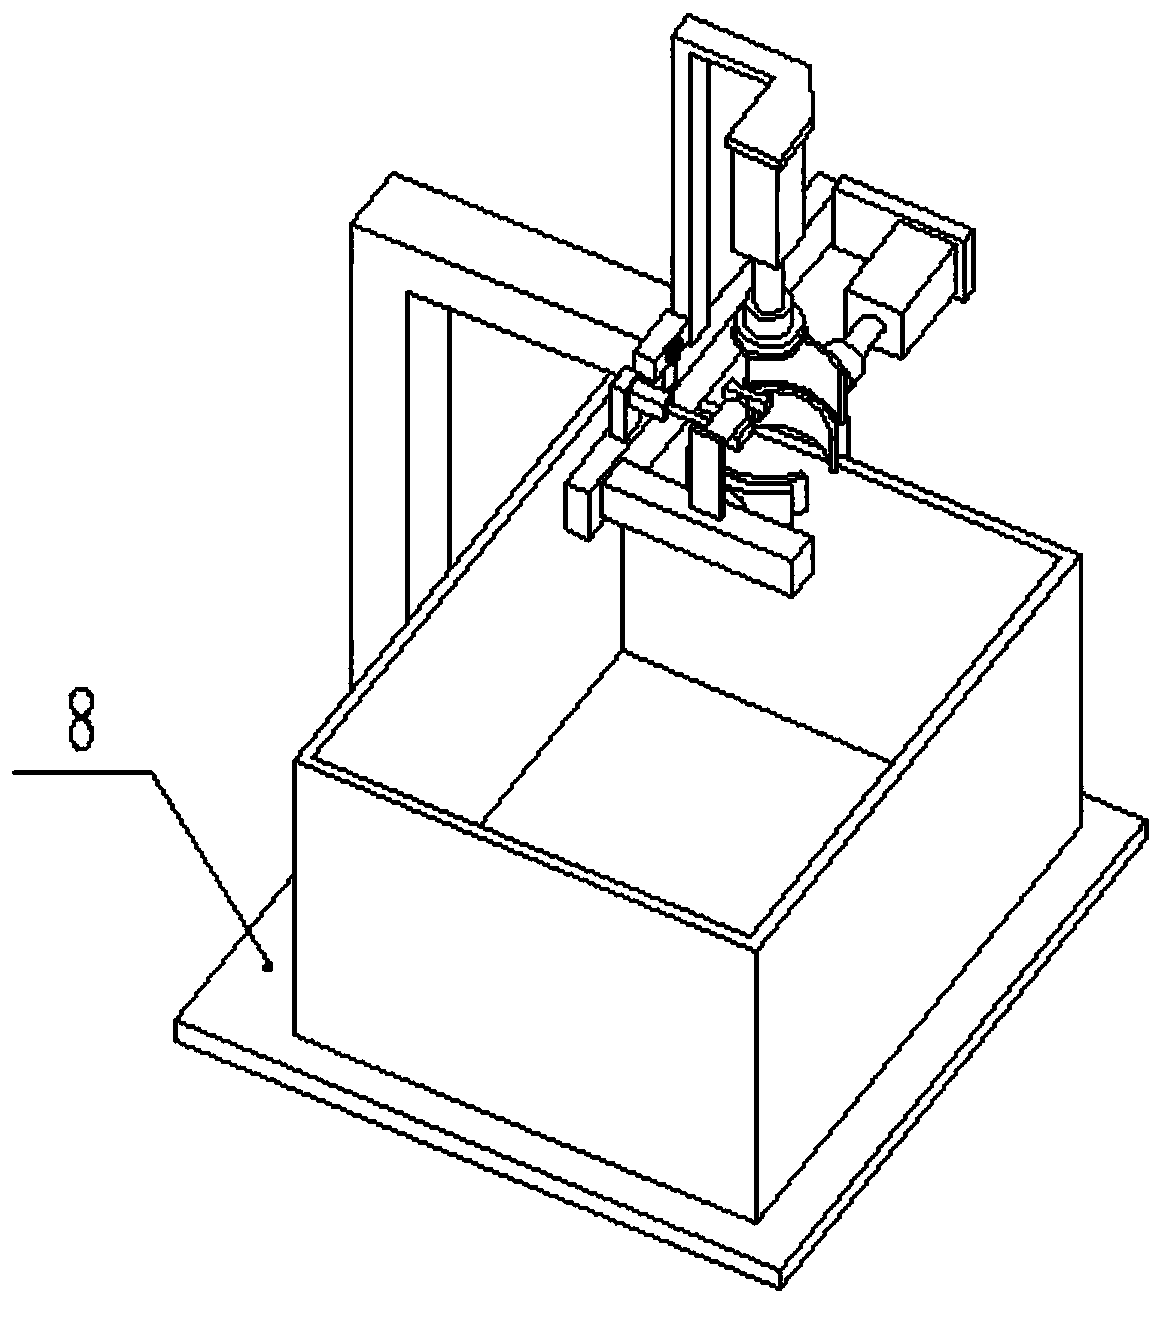 Automatic bottle opening device for medical use